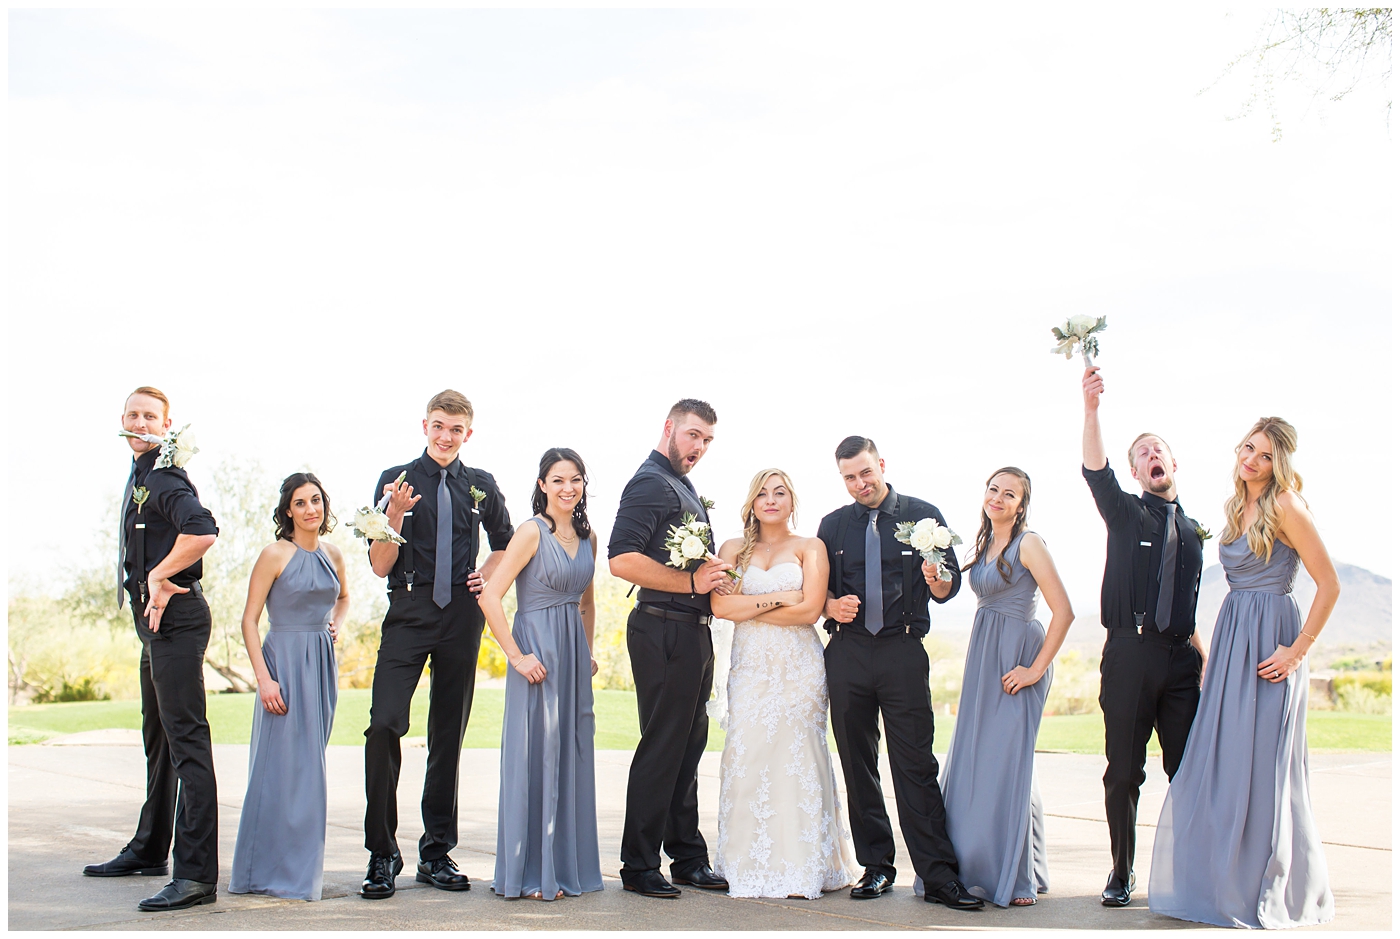 bride with fishtail braid and strapless dress with white rose and greenery bouquet with bridesmaids in slate gray long dresses with groom in black pants and vest and tie with rolled up shirt sleeves with succulent boutonniere with groomsmen in black pants with suspenders and tie wedding day bridal party portrait